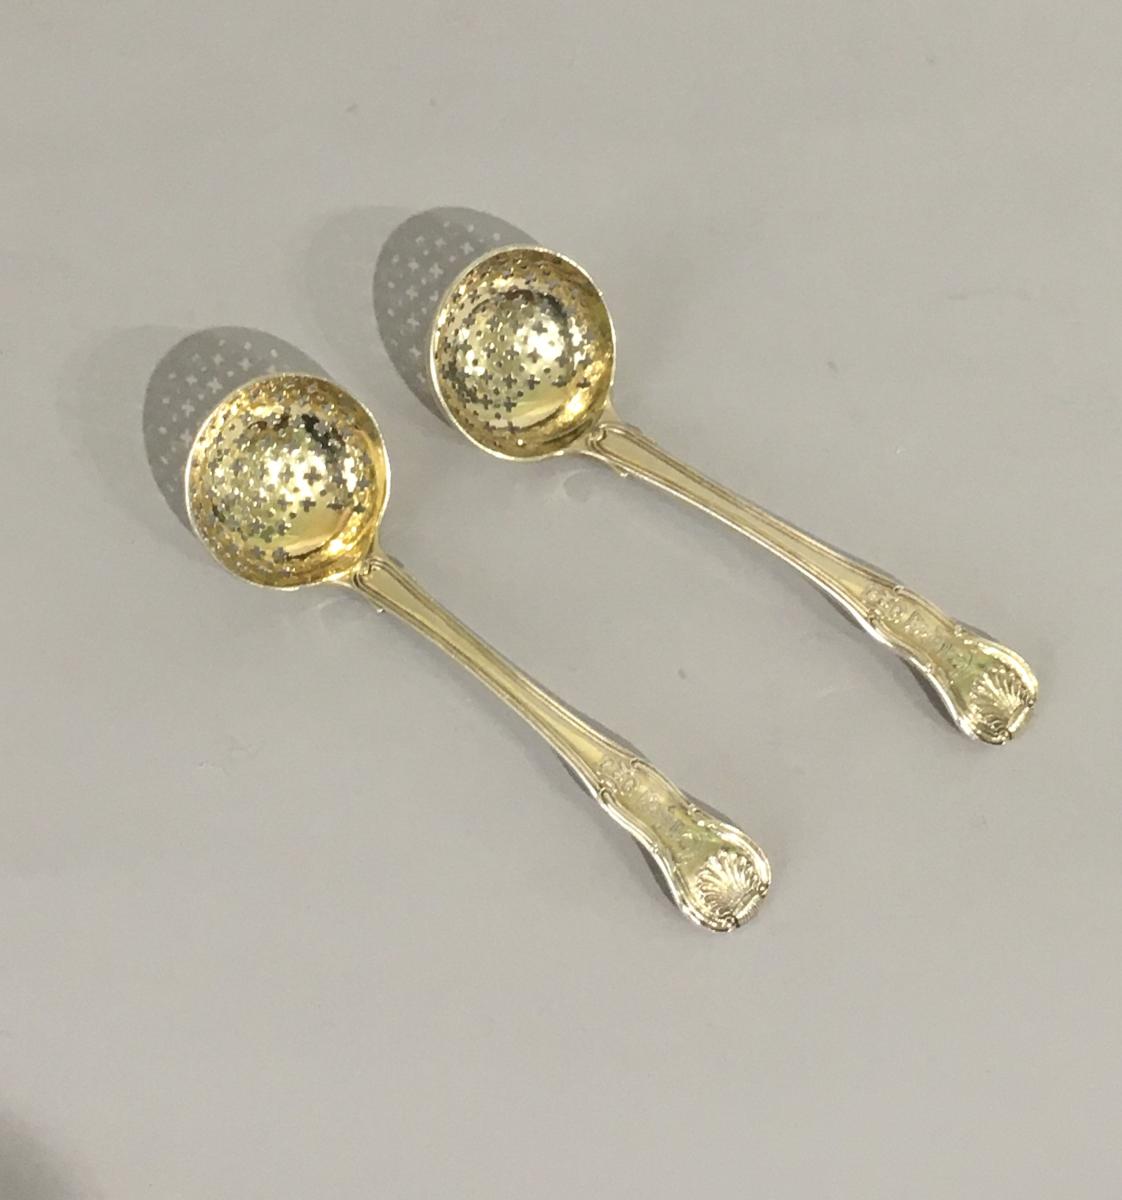 Pair of Silver Gilt Sifter Spoons. William Eley & William Fearn. London 1806